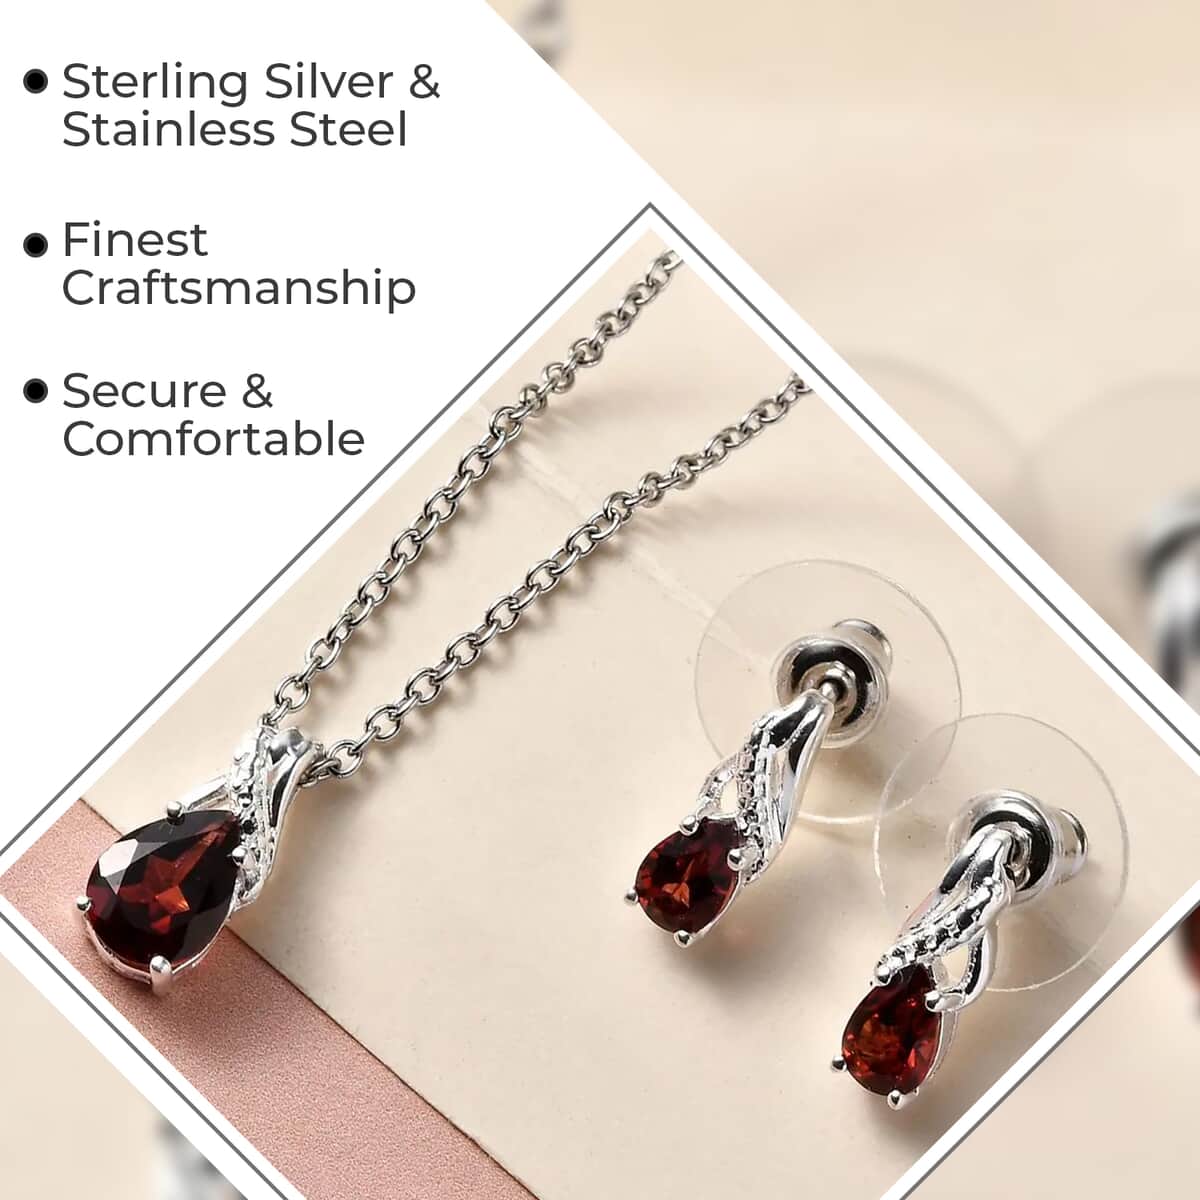 Mozambique Garnet Earrings and Pendant Necklace Jewelry Set, Sterling Silver and Stainless Steel Jewelry Set, Set of Garnet Earrings and Garnet Pendant Necklace 2.25 ctw image number 3